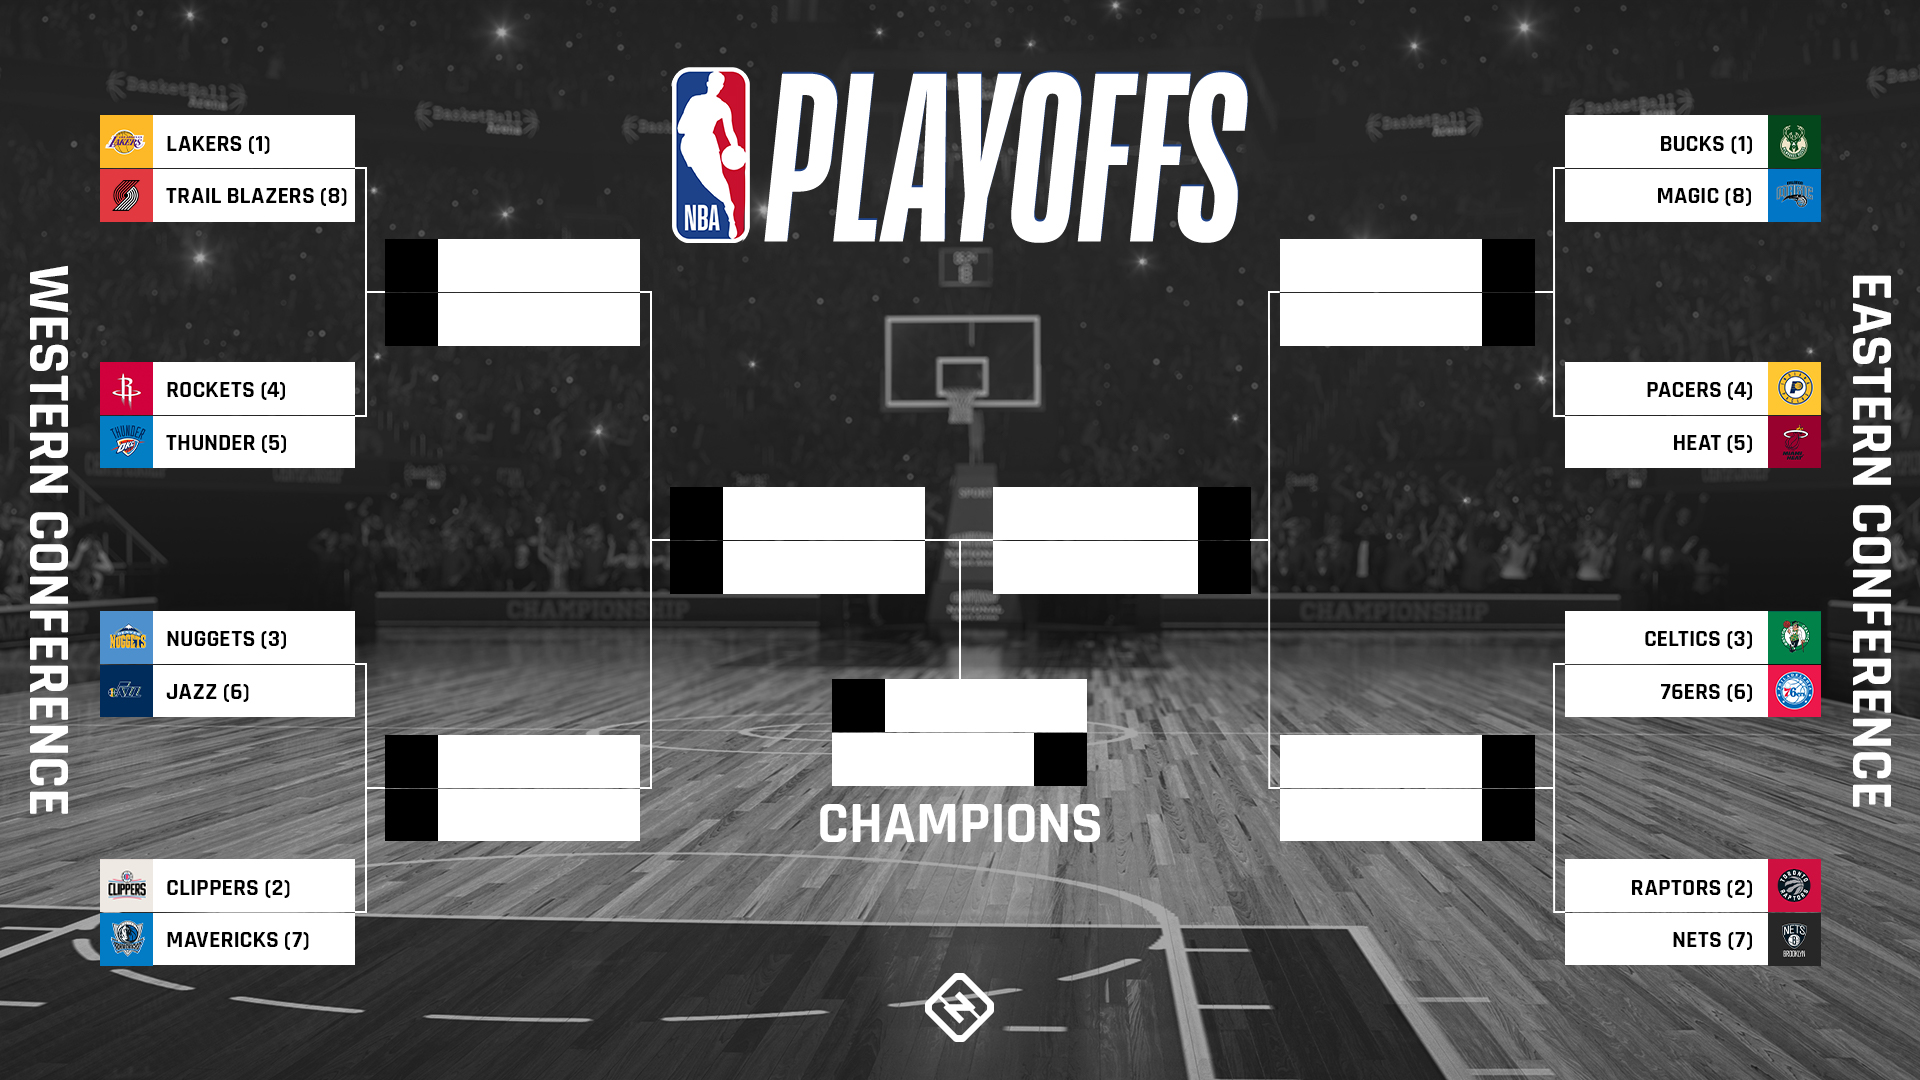 What teams are in the 2022 NBA Playoffs?